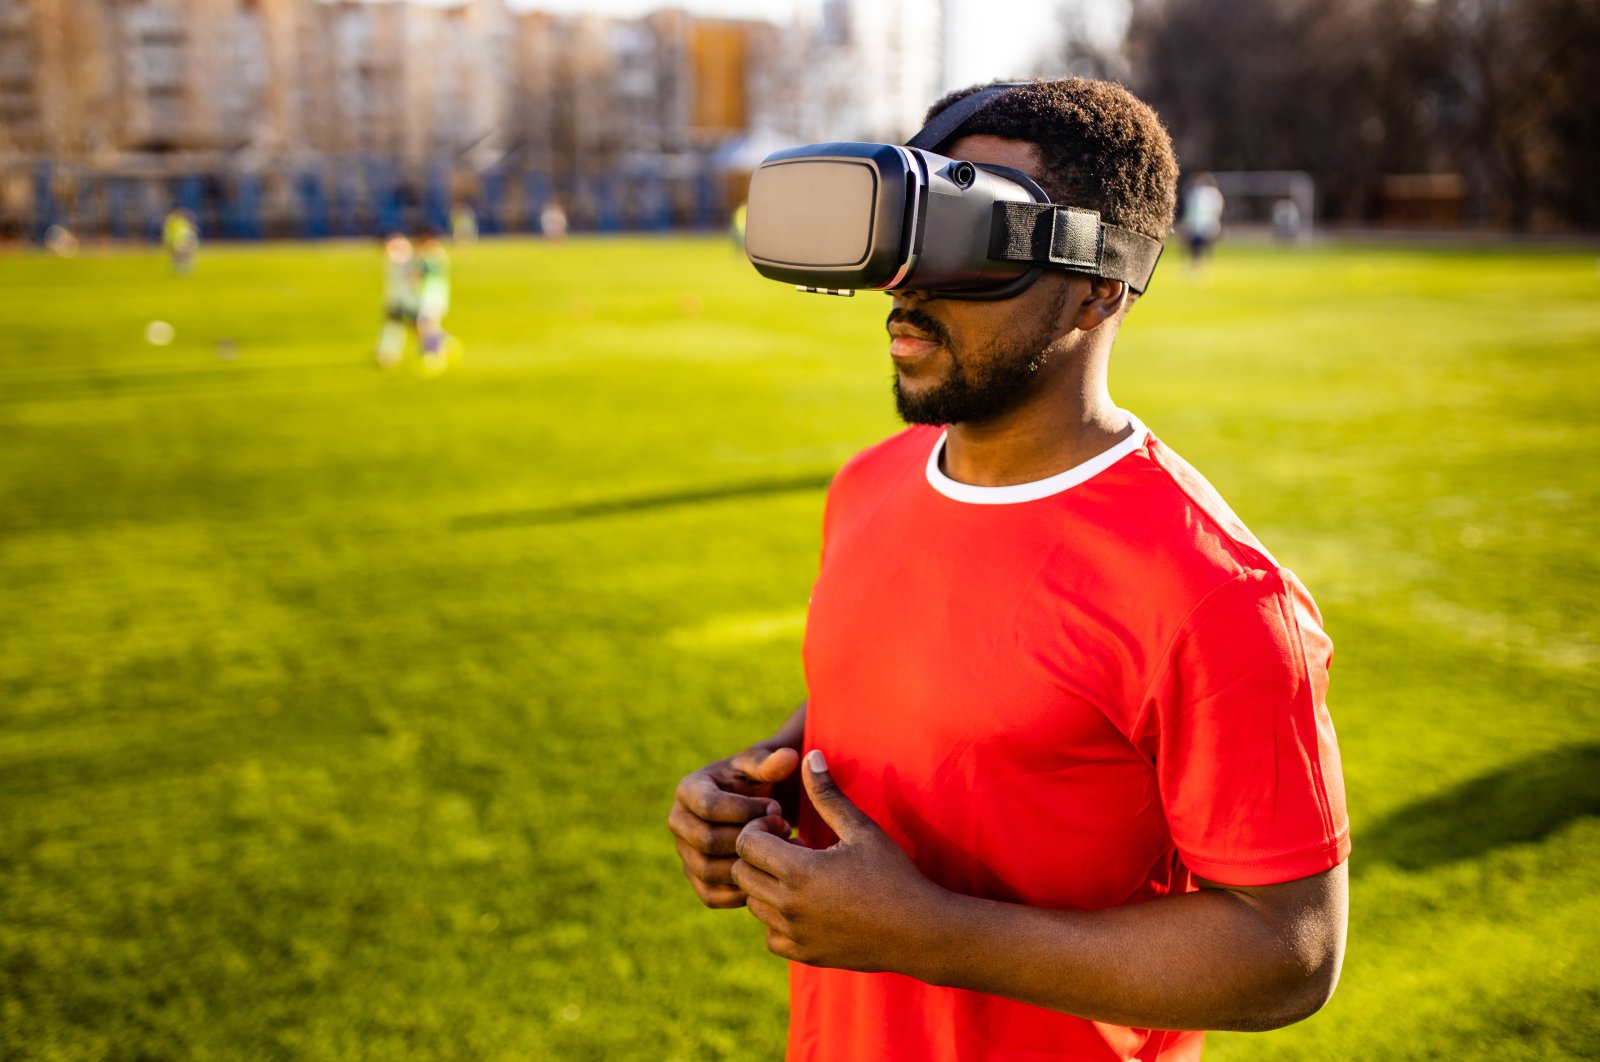 Players involved in a study at Manchester Metropolitan University&#039;s Institute of Sport and its Department of Sport and Exercise Sciences demonstrated greater performance in &quot;real world&quot; heading after training with a VR headset compared to a control group who did no training. (Shutterstock Photo)